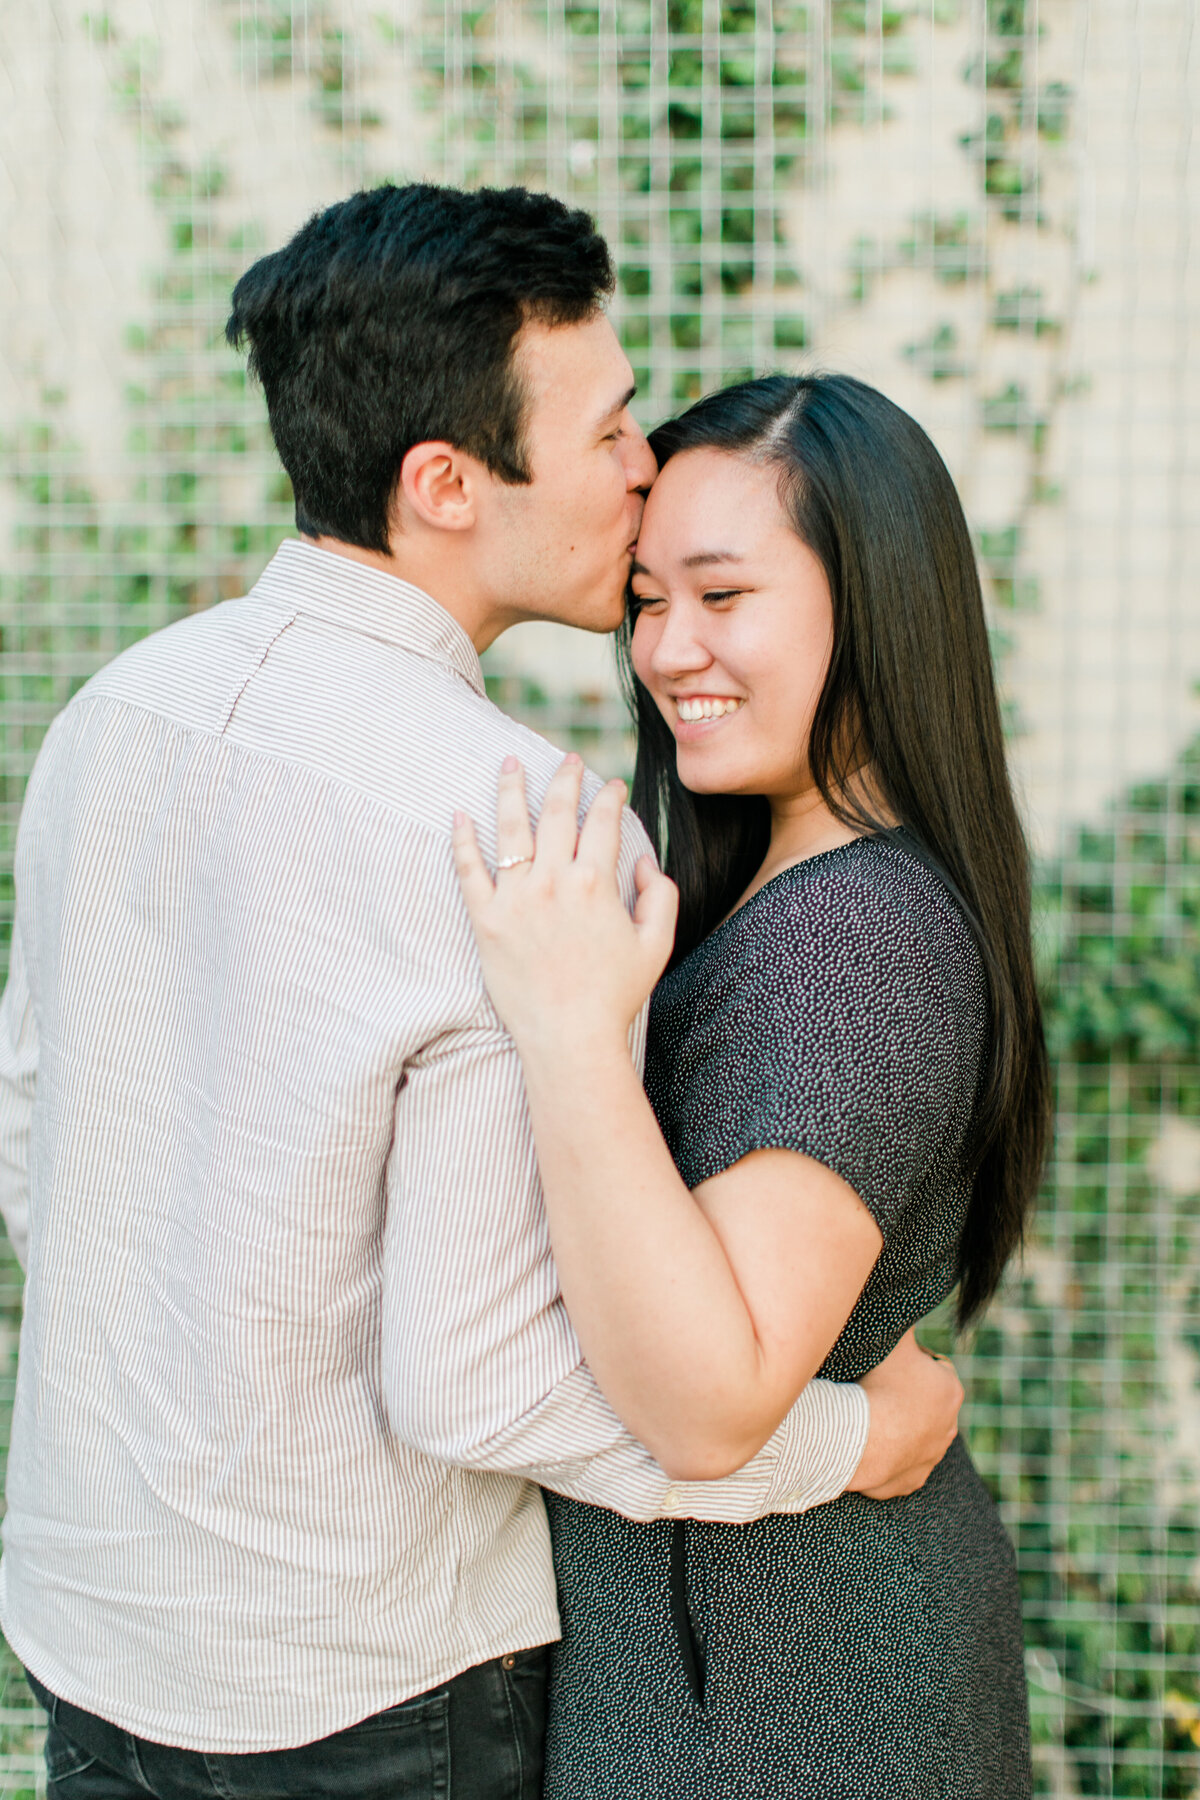 Becky_Collin_Navy_Yards_Park_The_Wharf_Washington_DC_Fall_Engagement_Session_AngelikaJohnsPhotography-8094